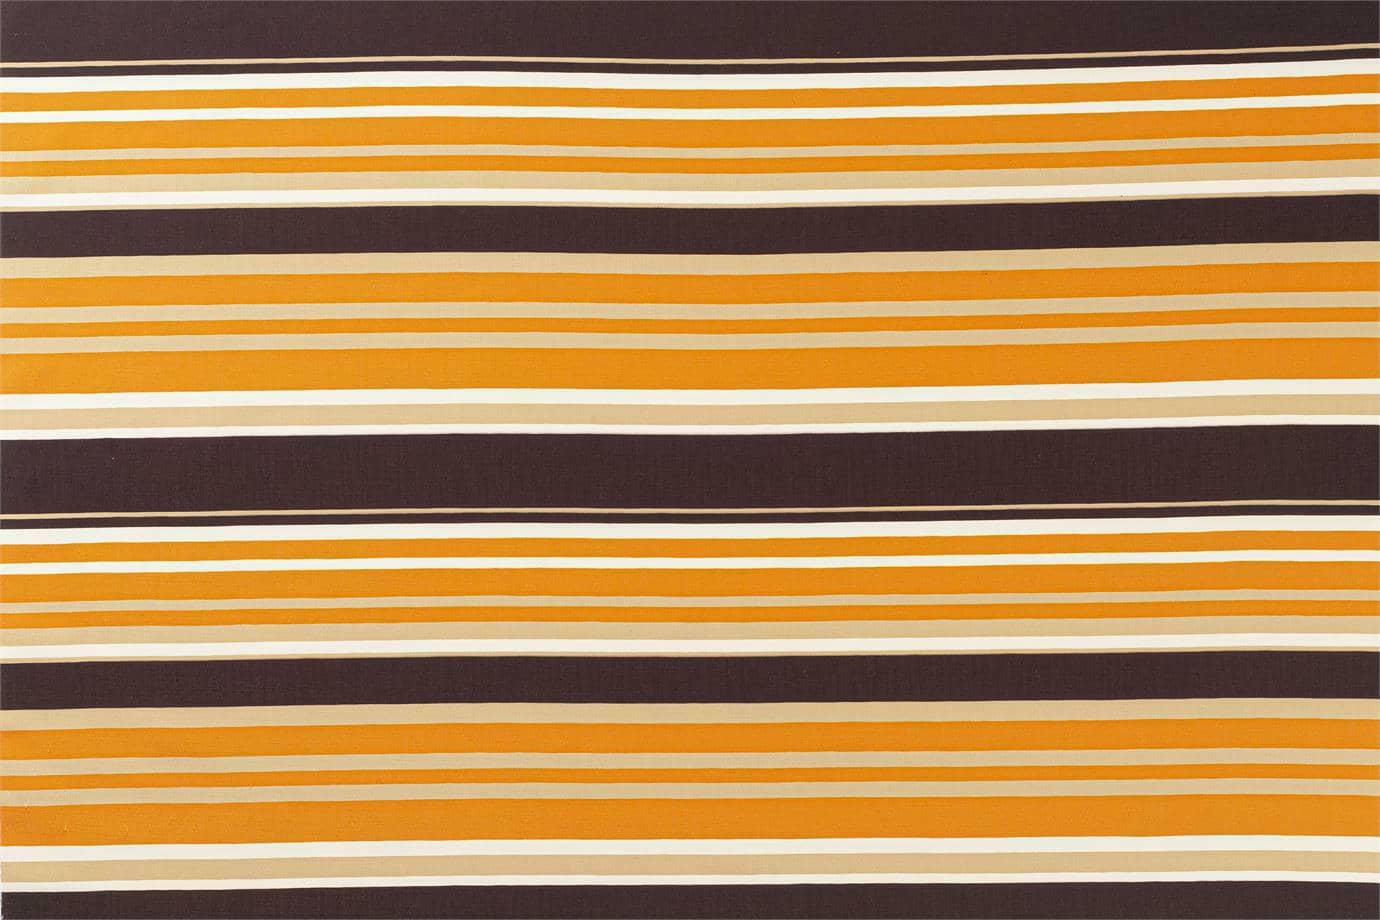 J2501 REPS 004 Zucca home decoration fabric